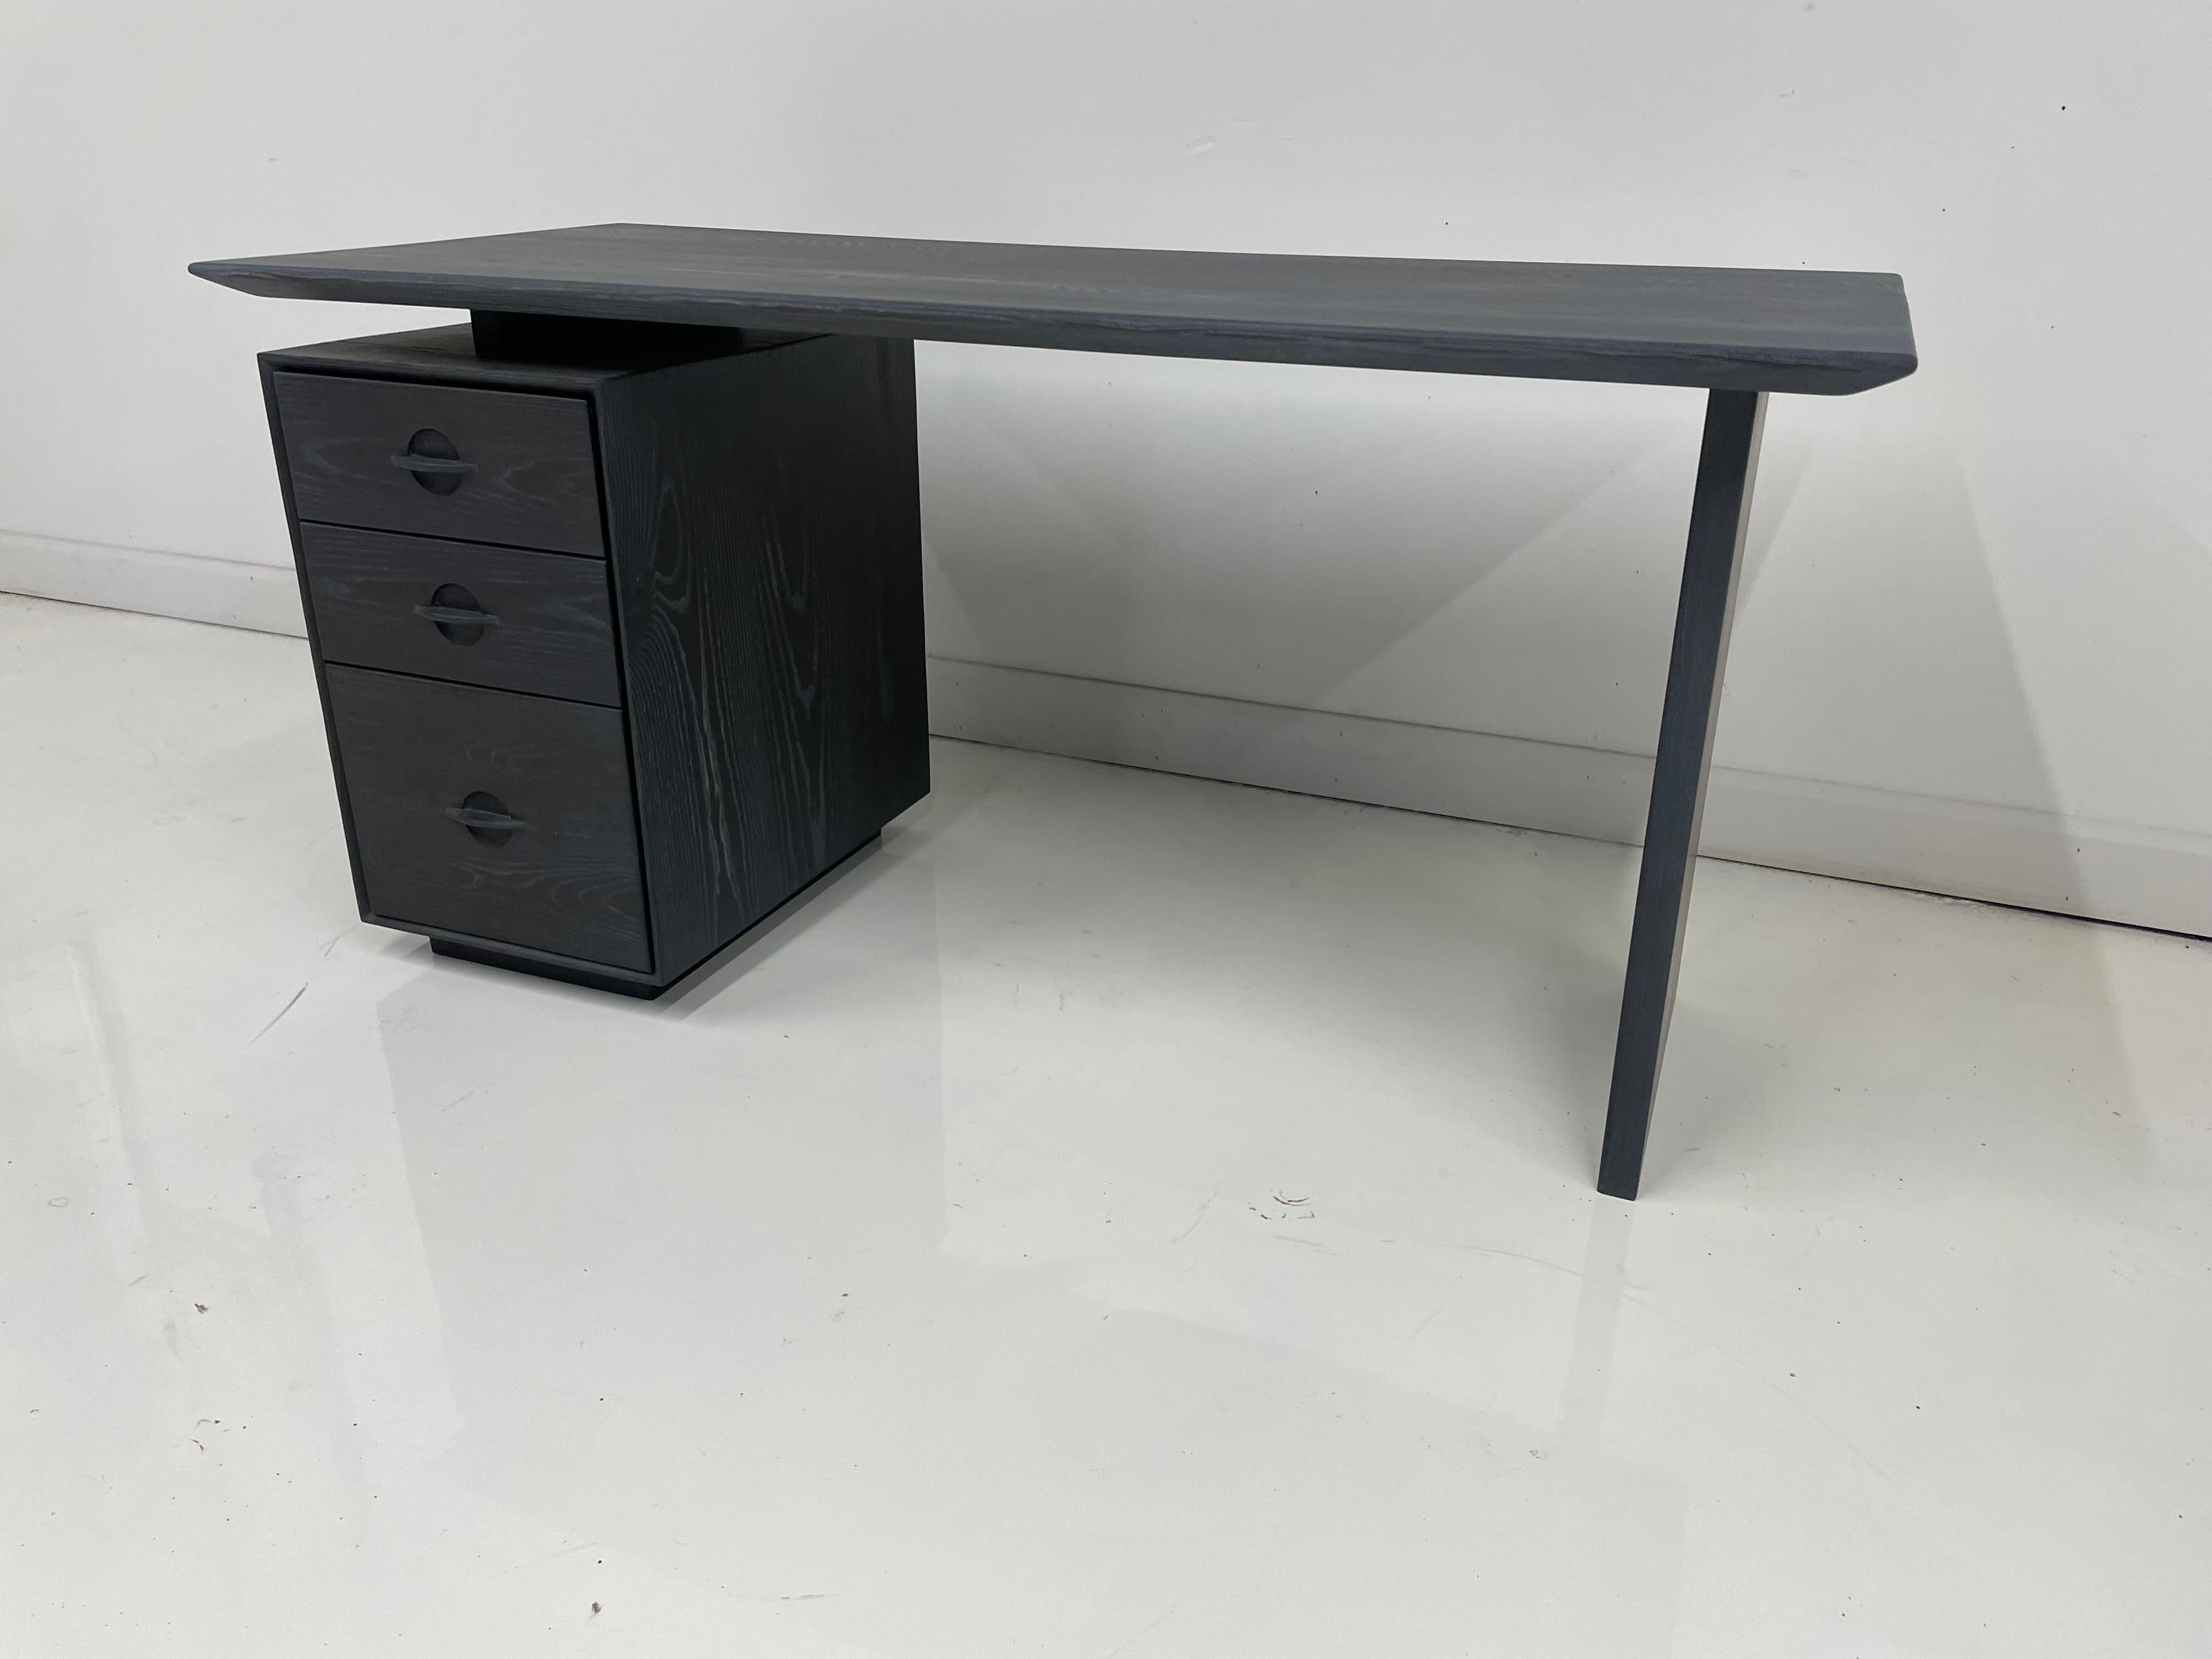 The Odin desk has been designed to be as minimal as possible without reducing the functionality generally required by a desk. Many modern desks come without storage - we saw this as a huge drawback (who doesn't need desk storage) A simple top with